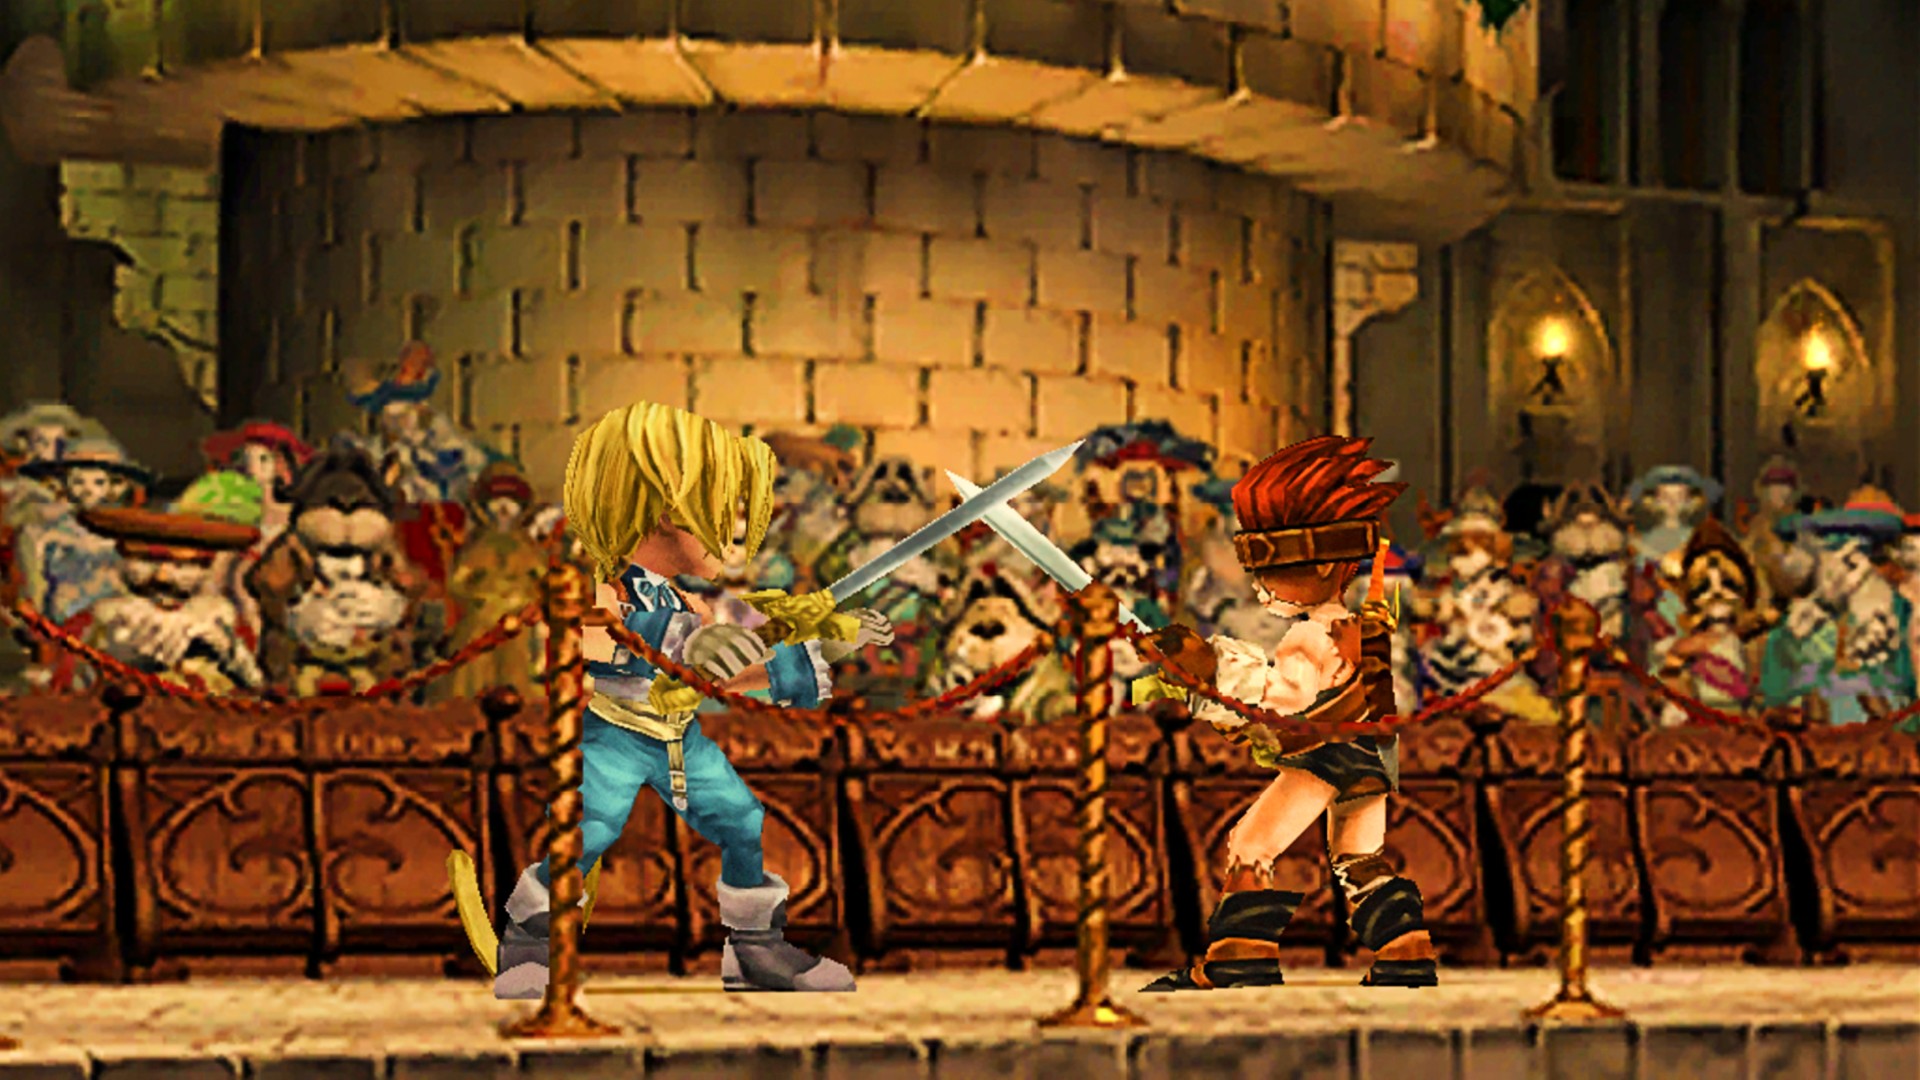 Final Fantasy 9 is getting an animated series